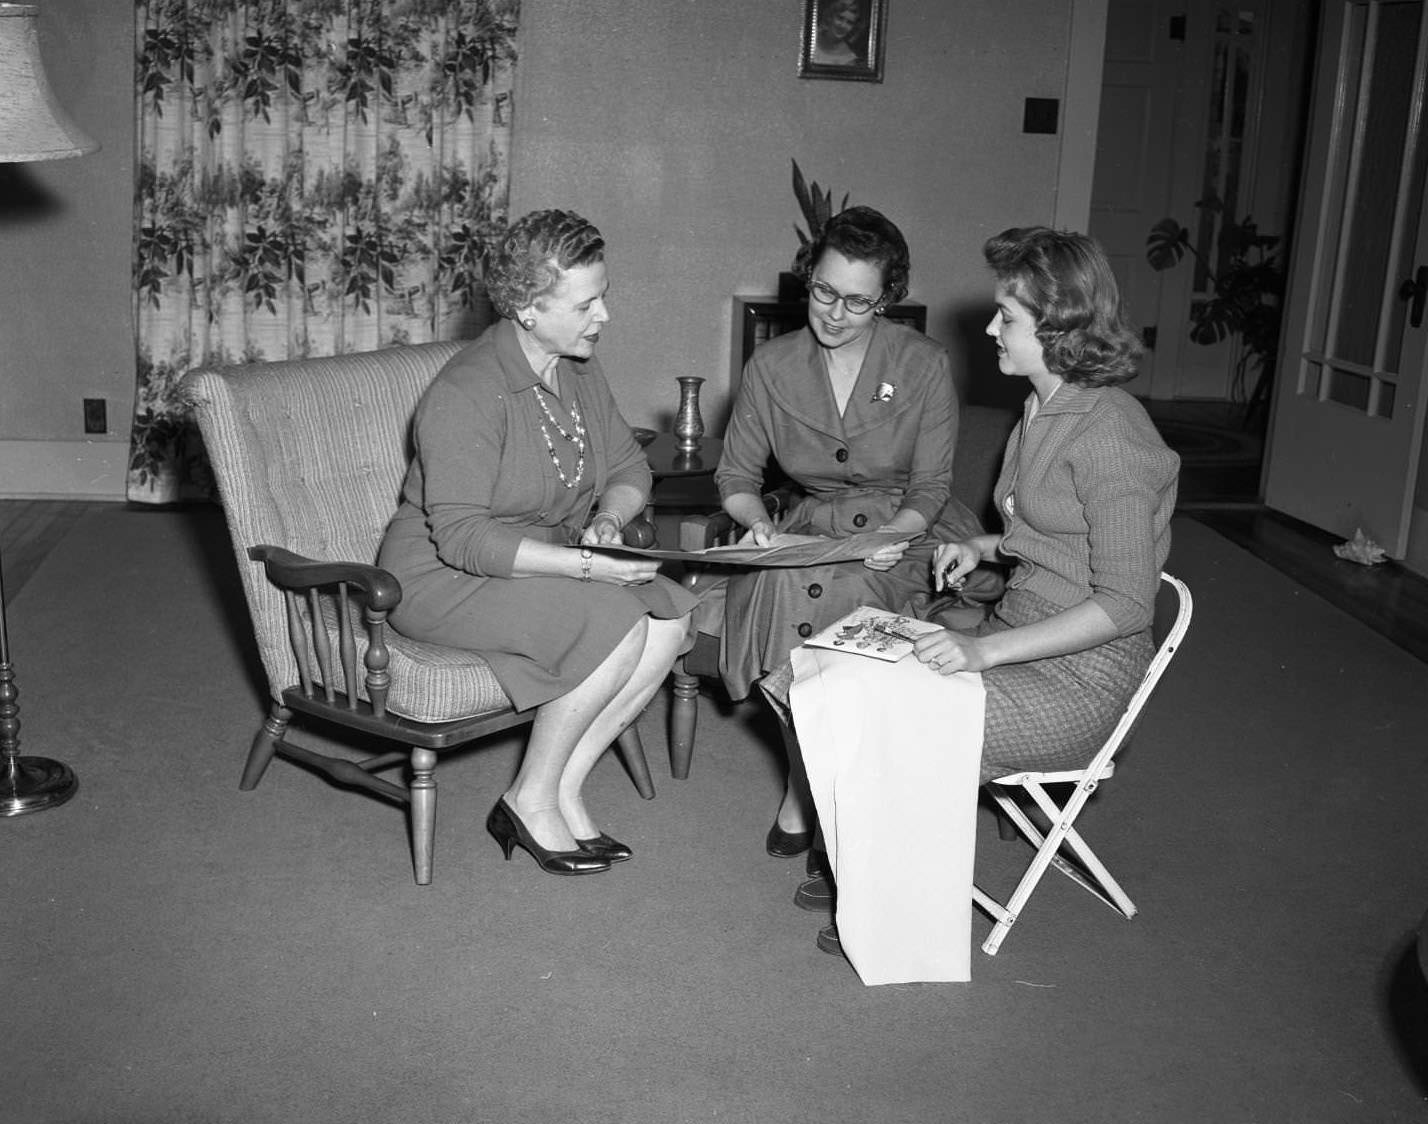 Three women in skirts sitting together looking at what appears to be a large piece of paper, 1958. The woman on the right appears to have a small paintbrush in her hand.